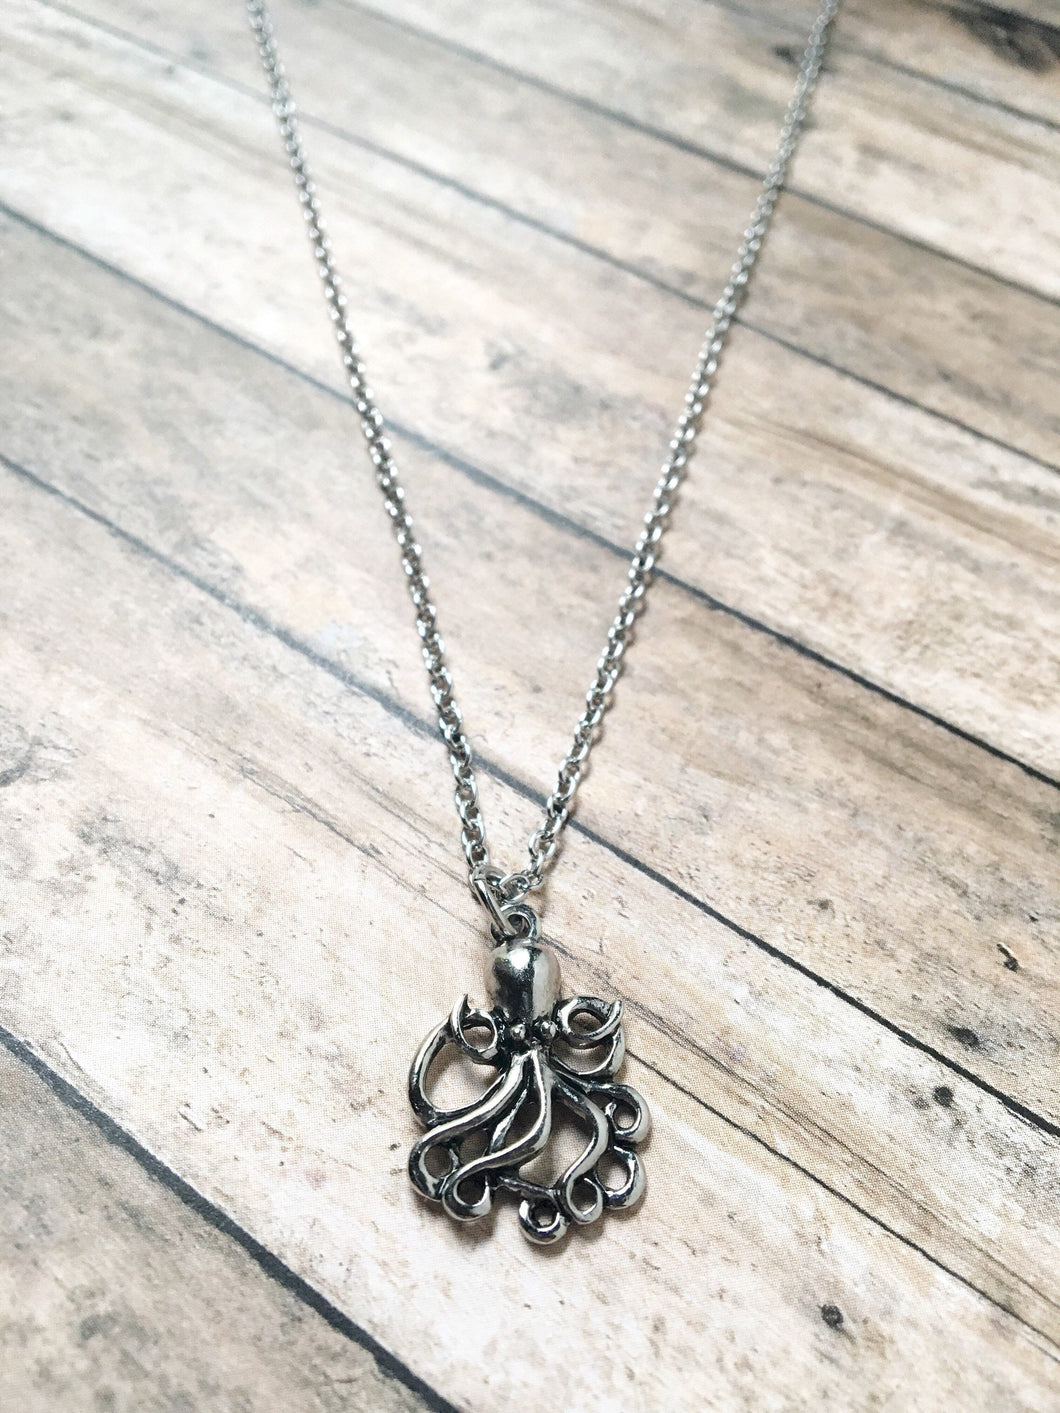 Ursula inspired necklace